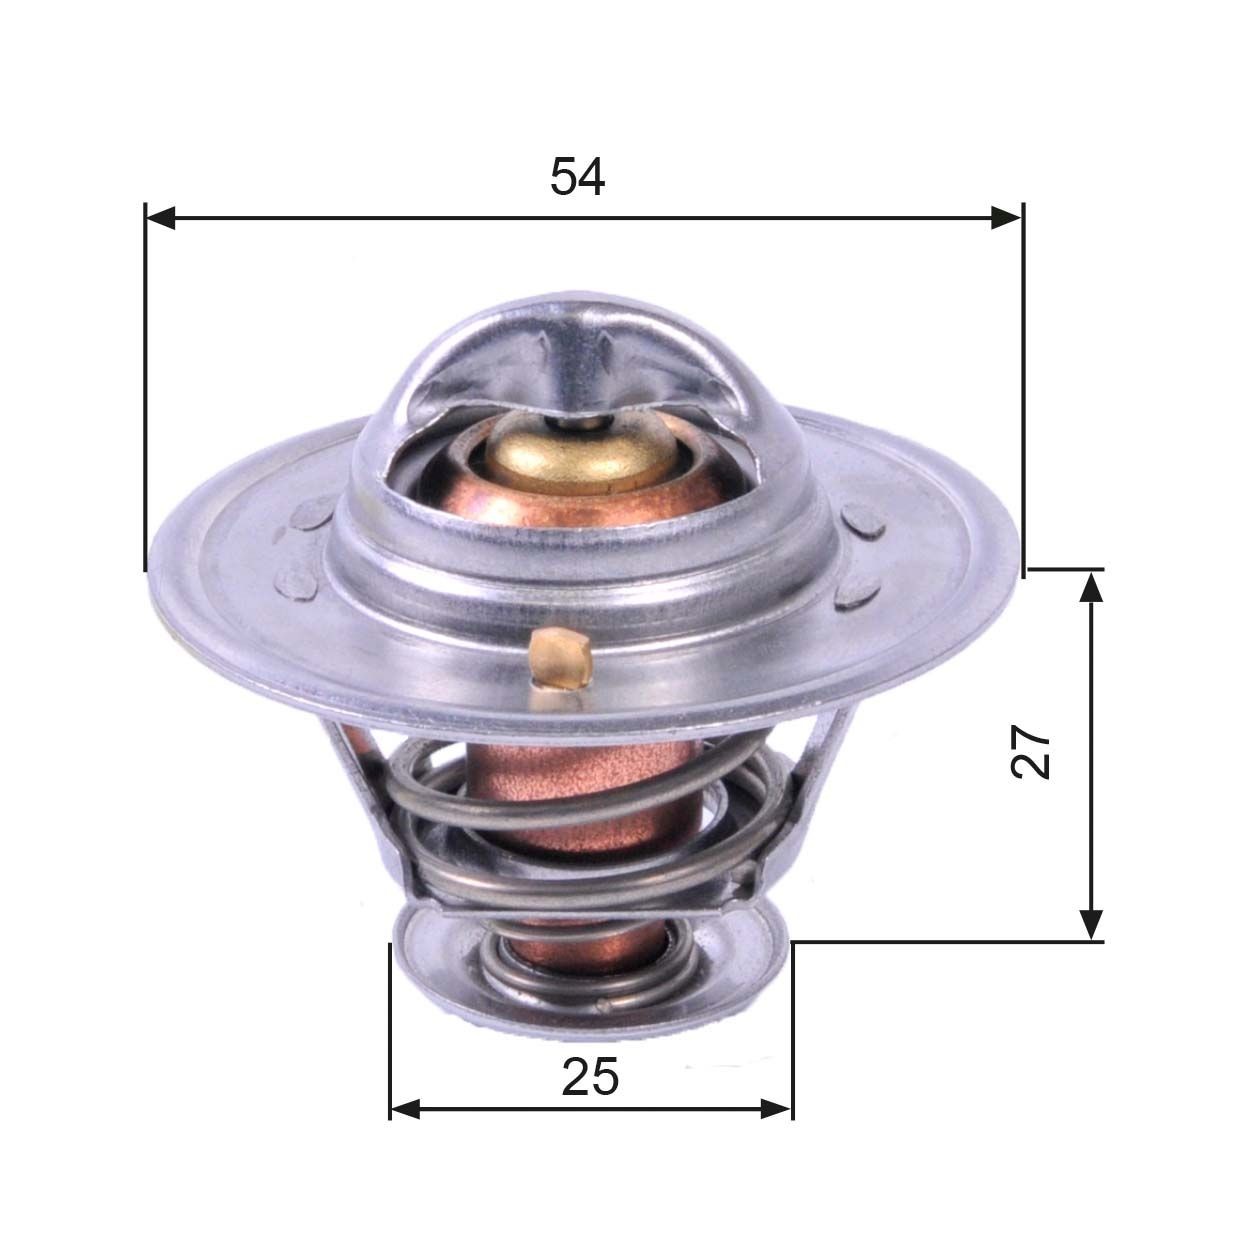 GATES TH22779G1 Engine thermostat Opening Temperature: 79°C, with gaskets/seals, without housing